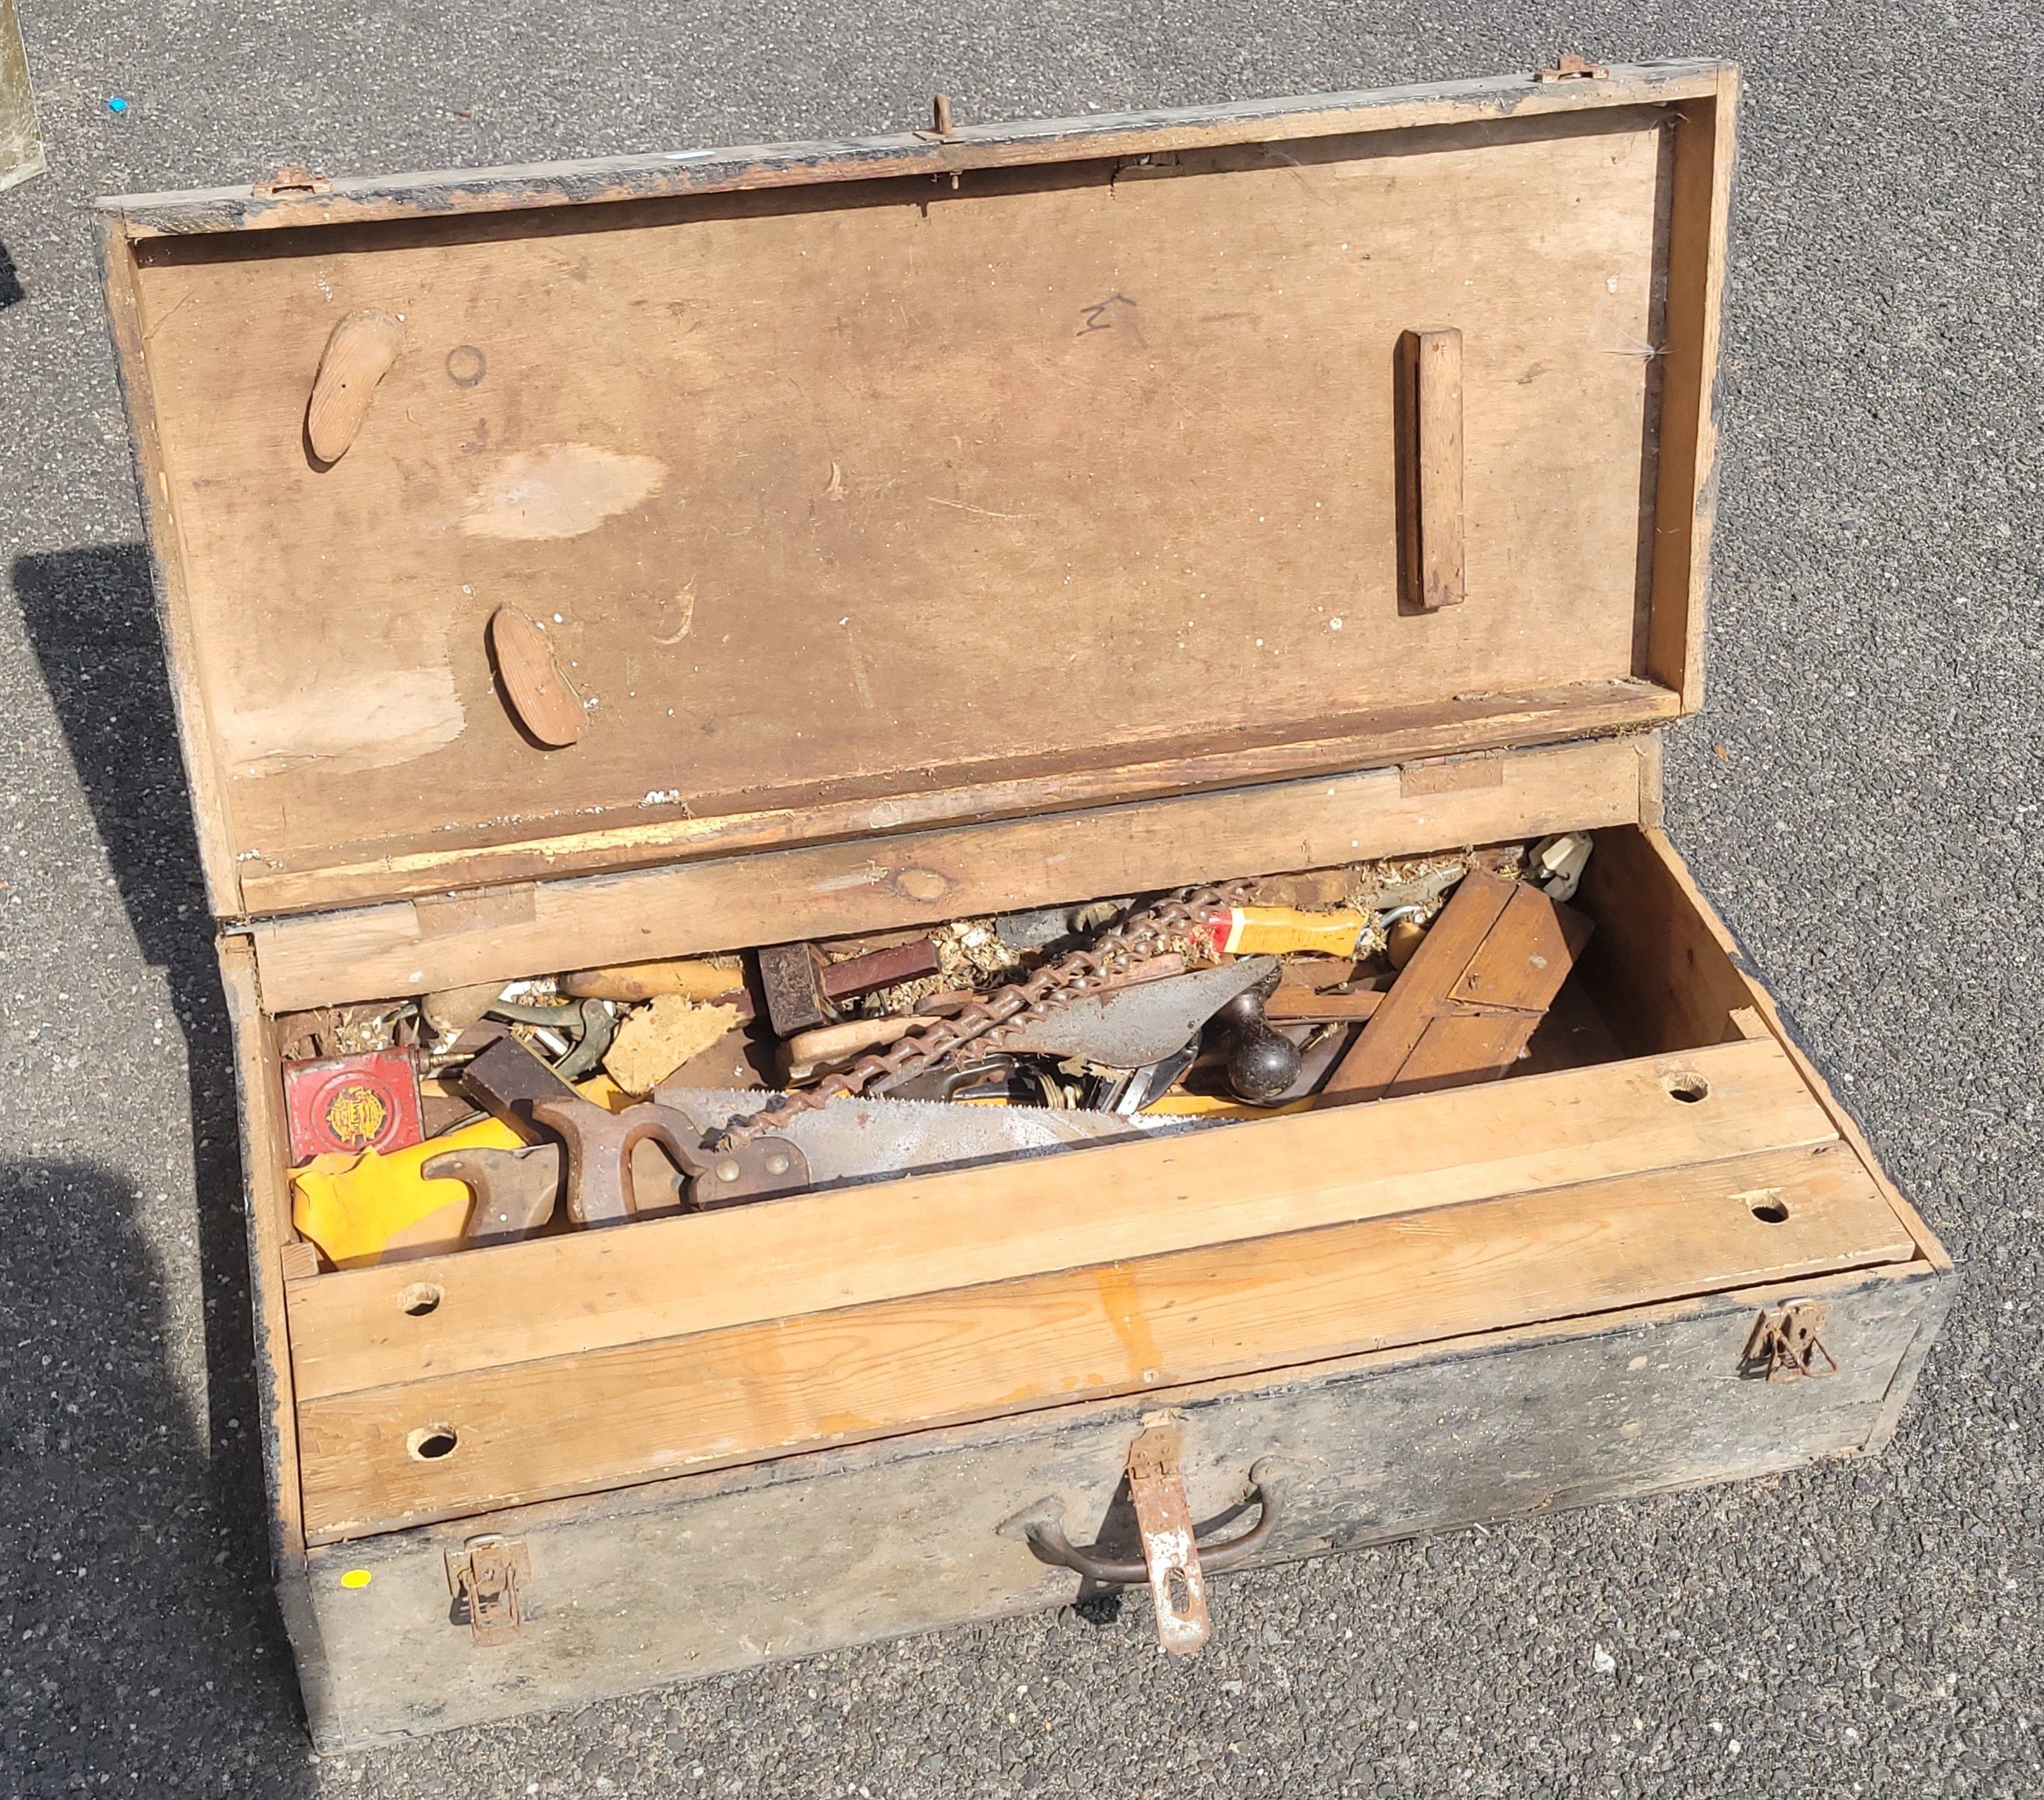 Two carpenters tool chests and contents, to include spanners, saws, planes, drill bits, socket